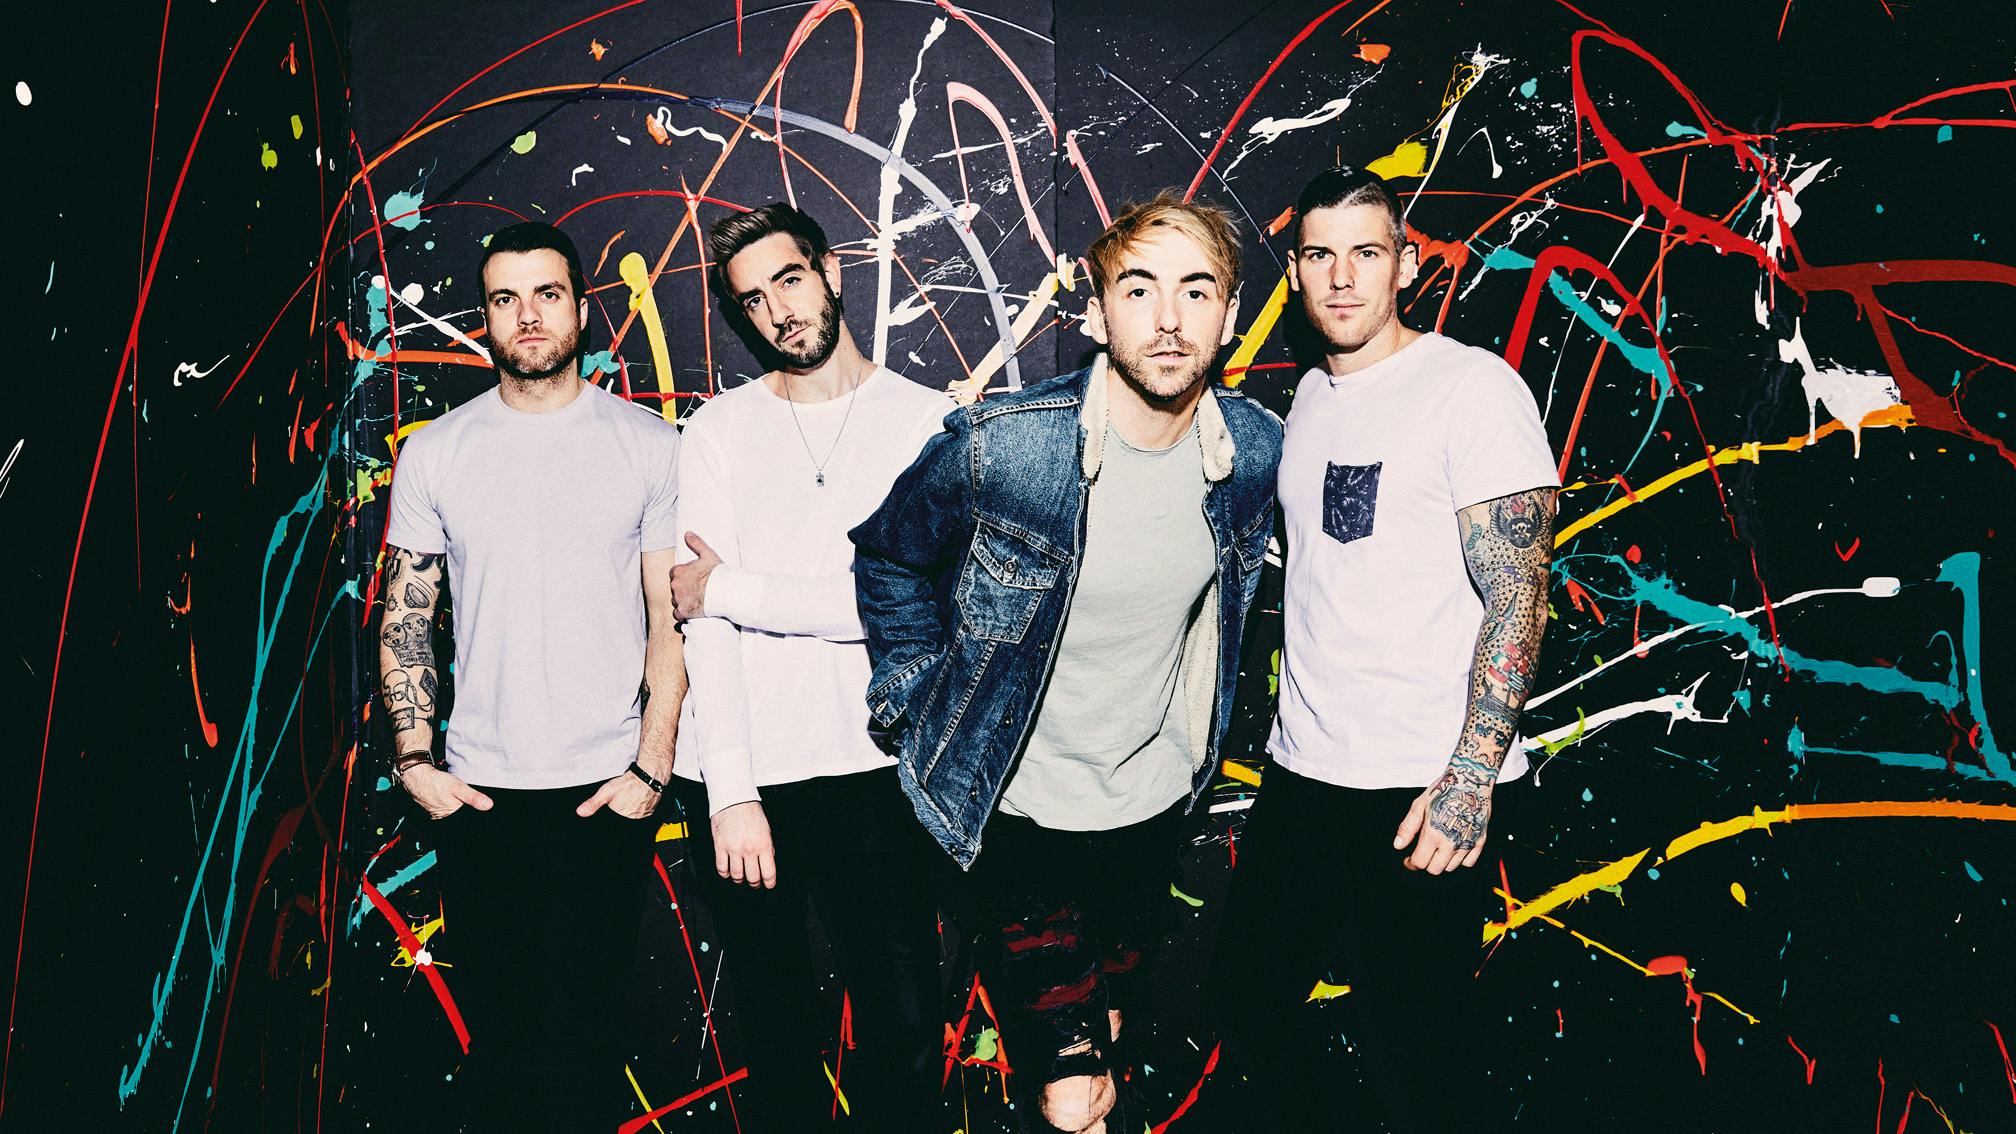 All Time Low, The Story So Far, The Maine and More Announced For Sad Summer Festival 2020